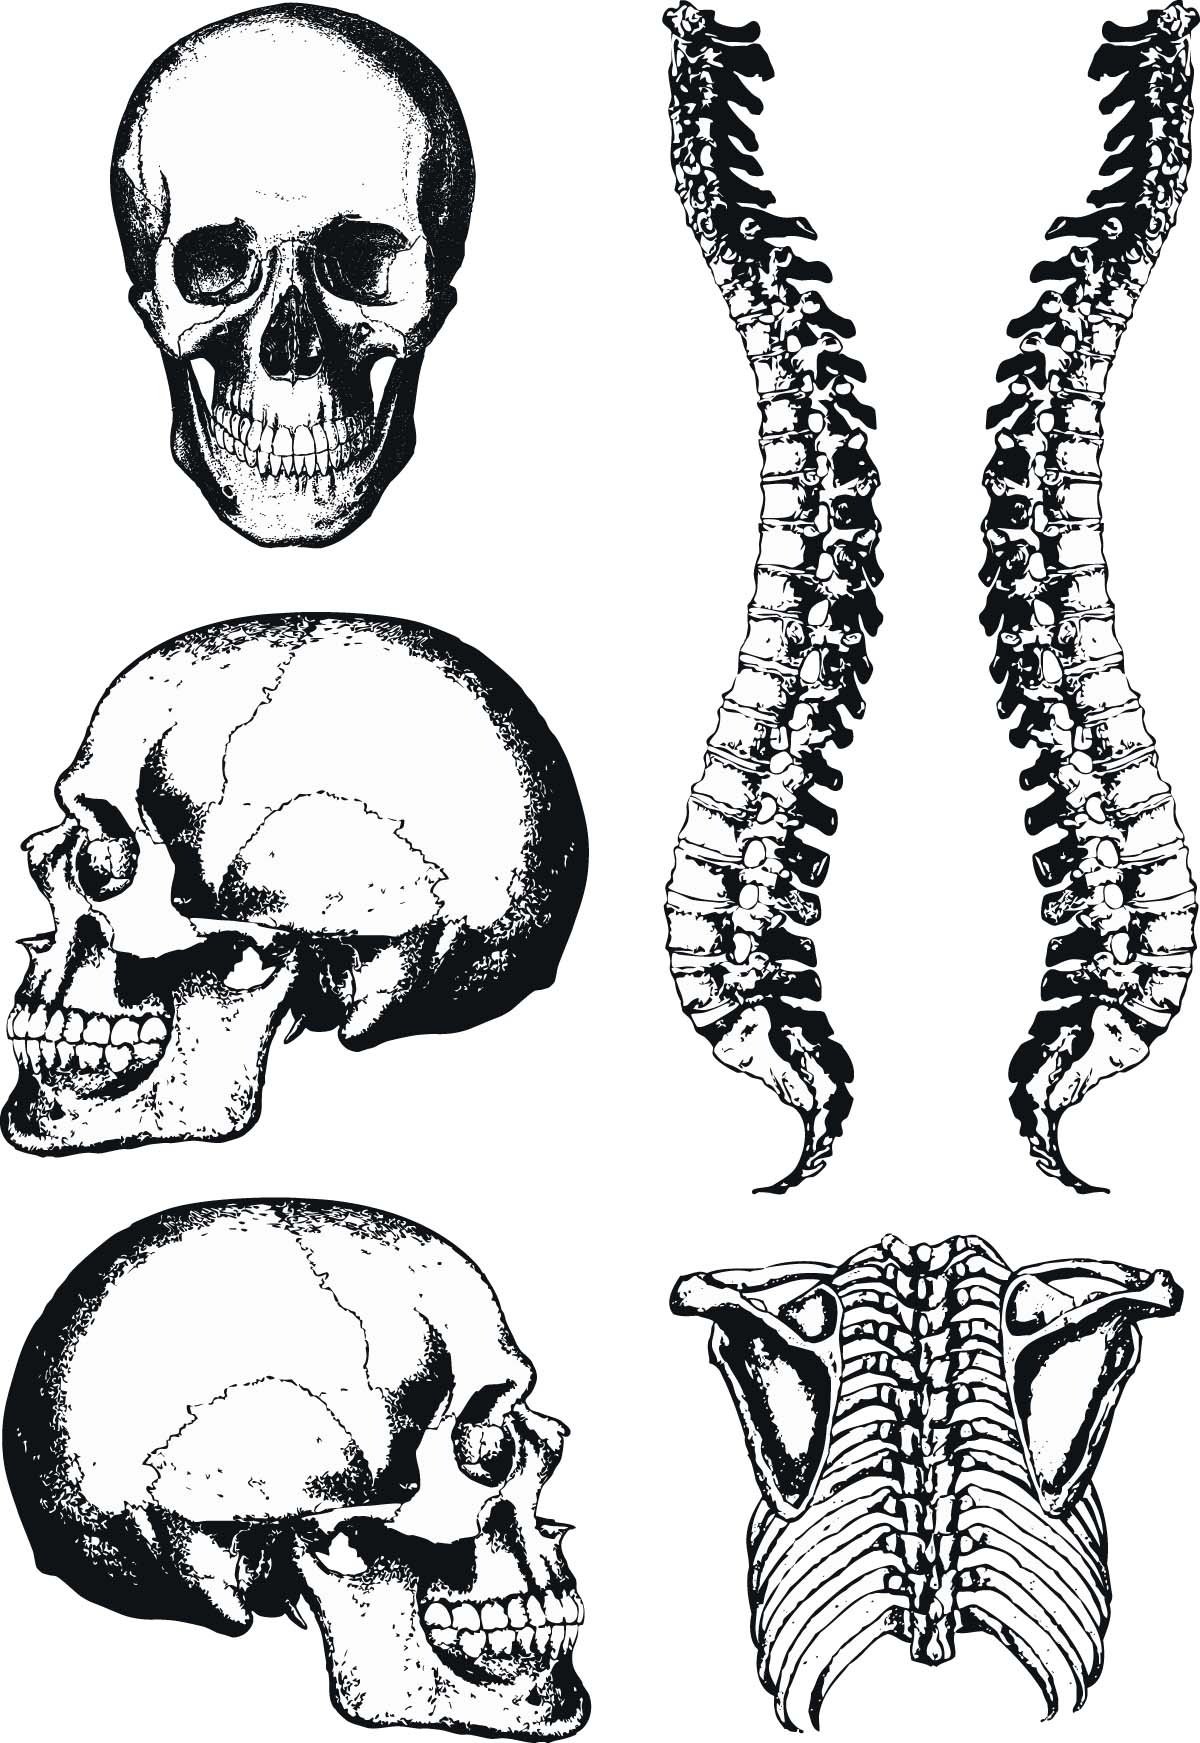 Human anatomy graphic skull and spine vector | Free download